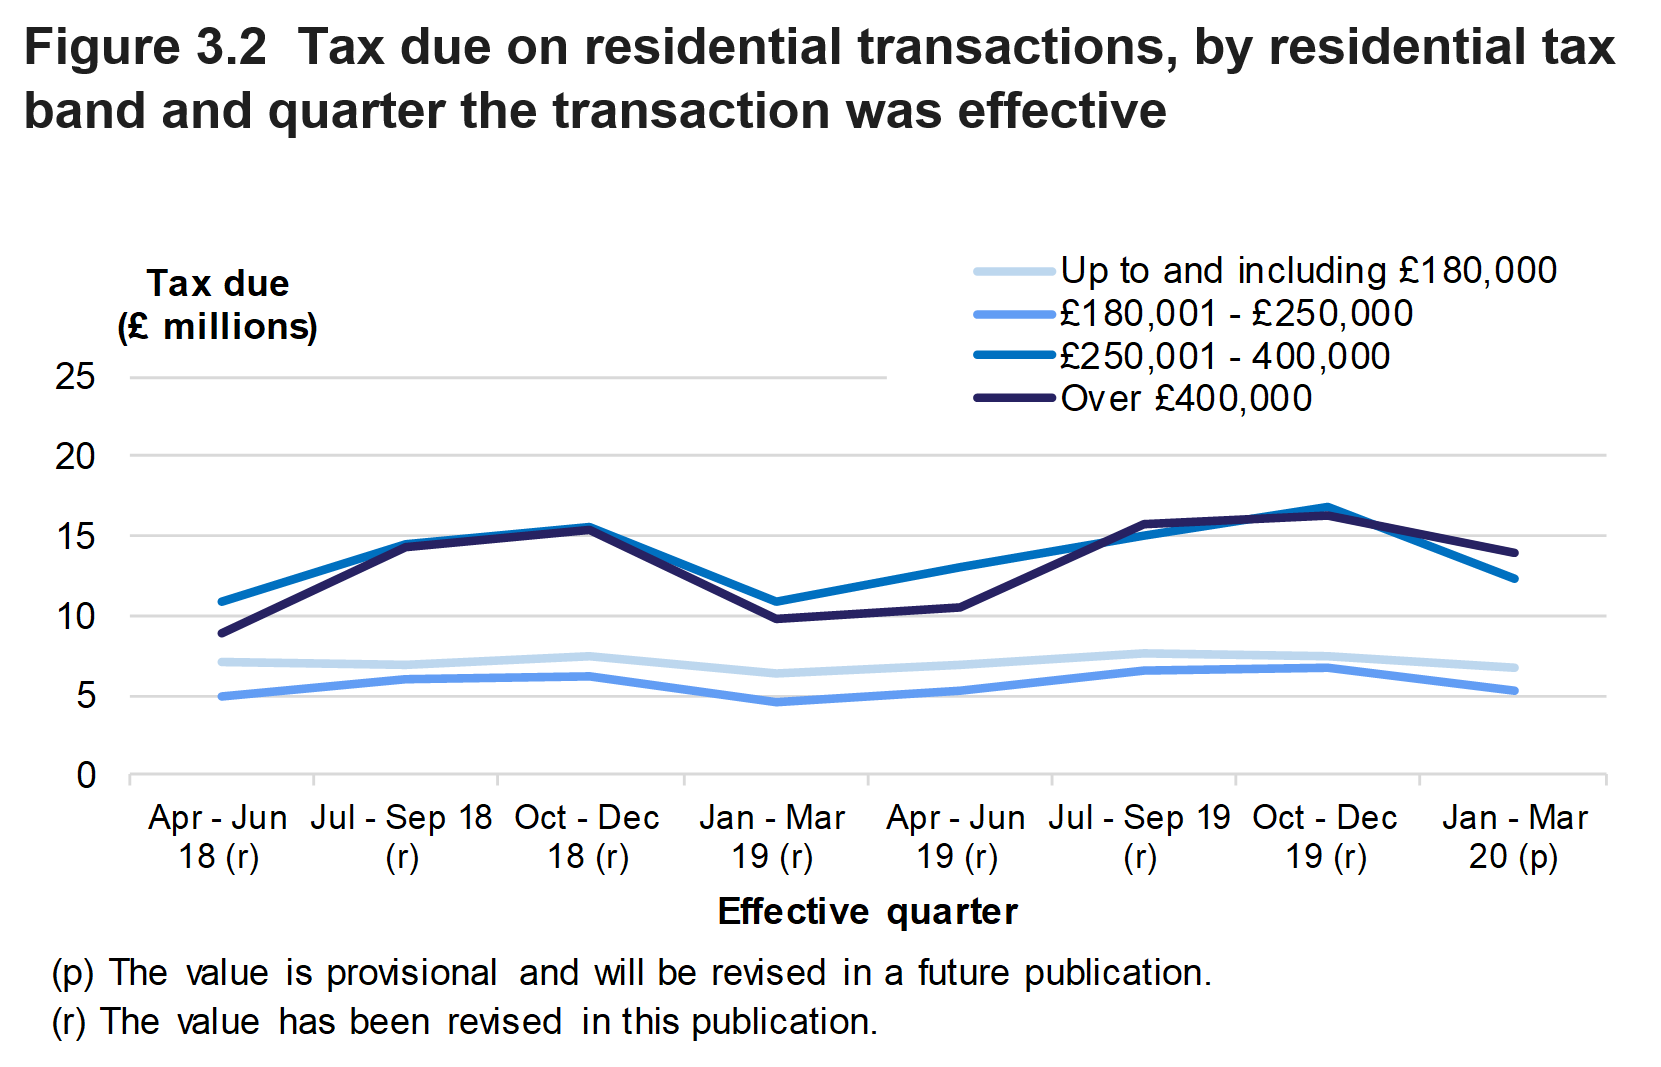 Figure 3.2 shows the tax due on residential transactions, by residential tax band and the quarter the transaction was effective.